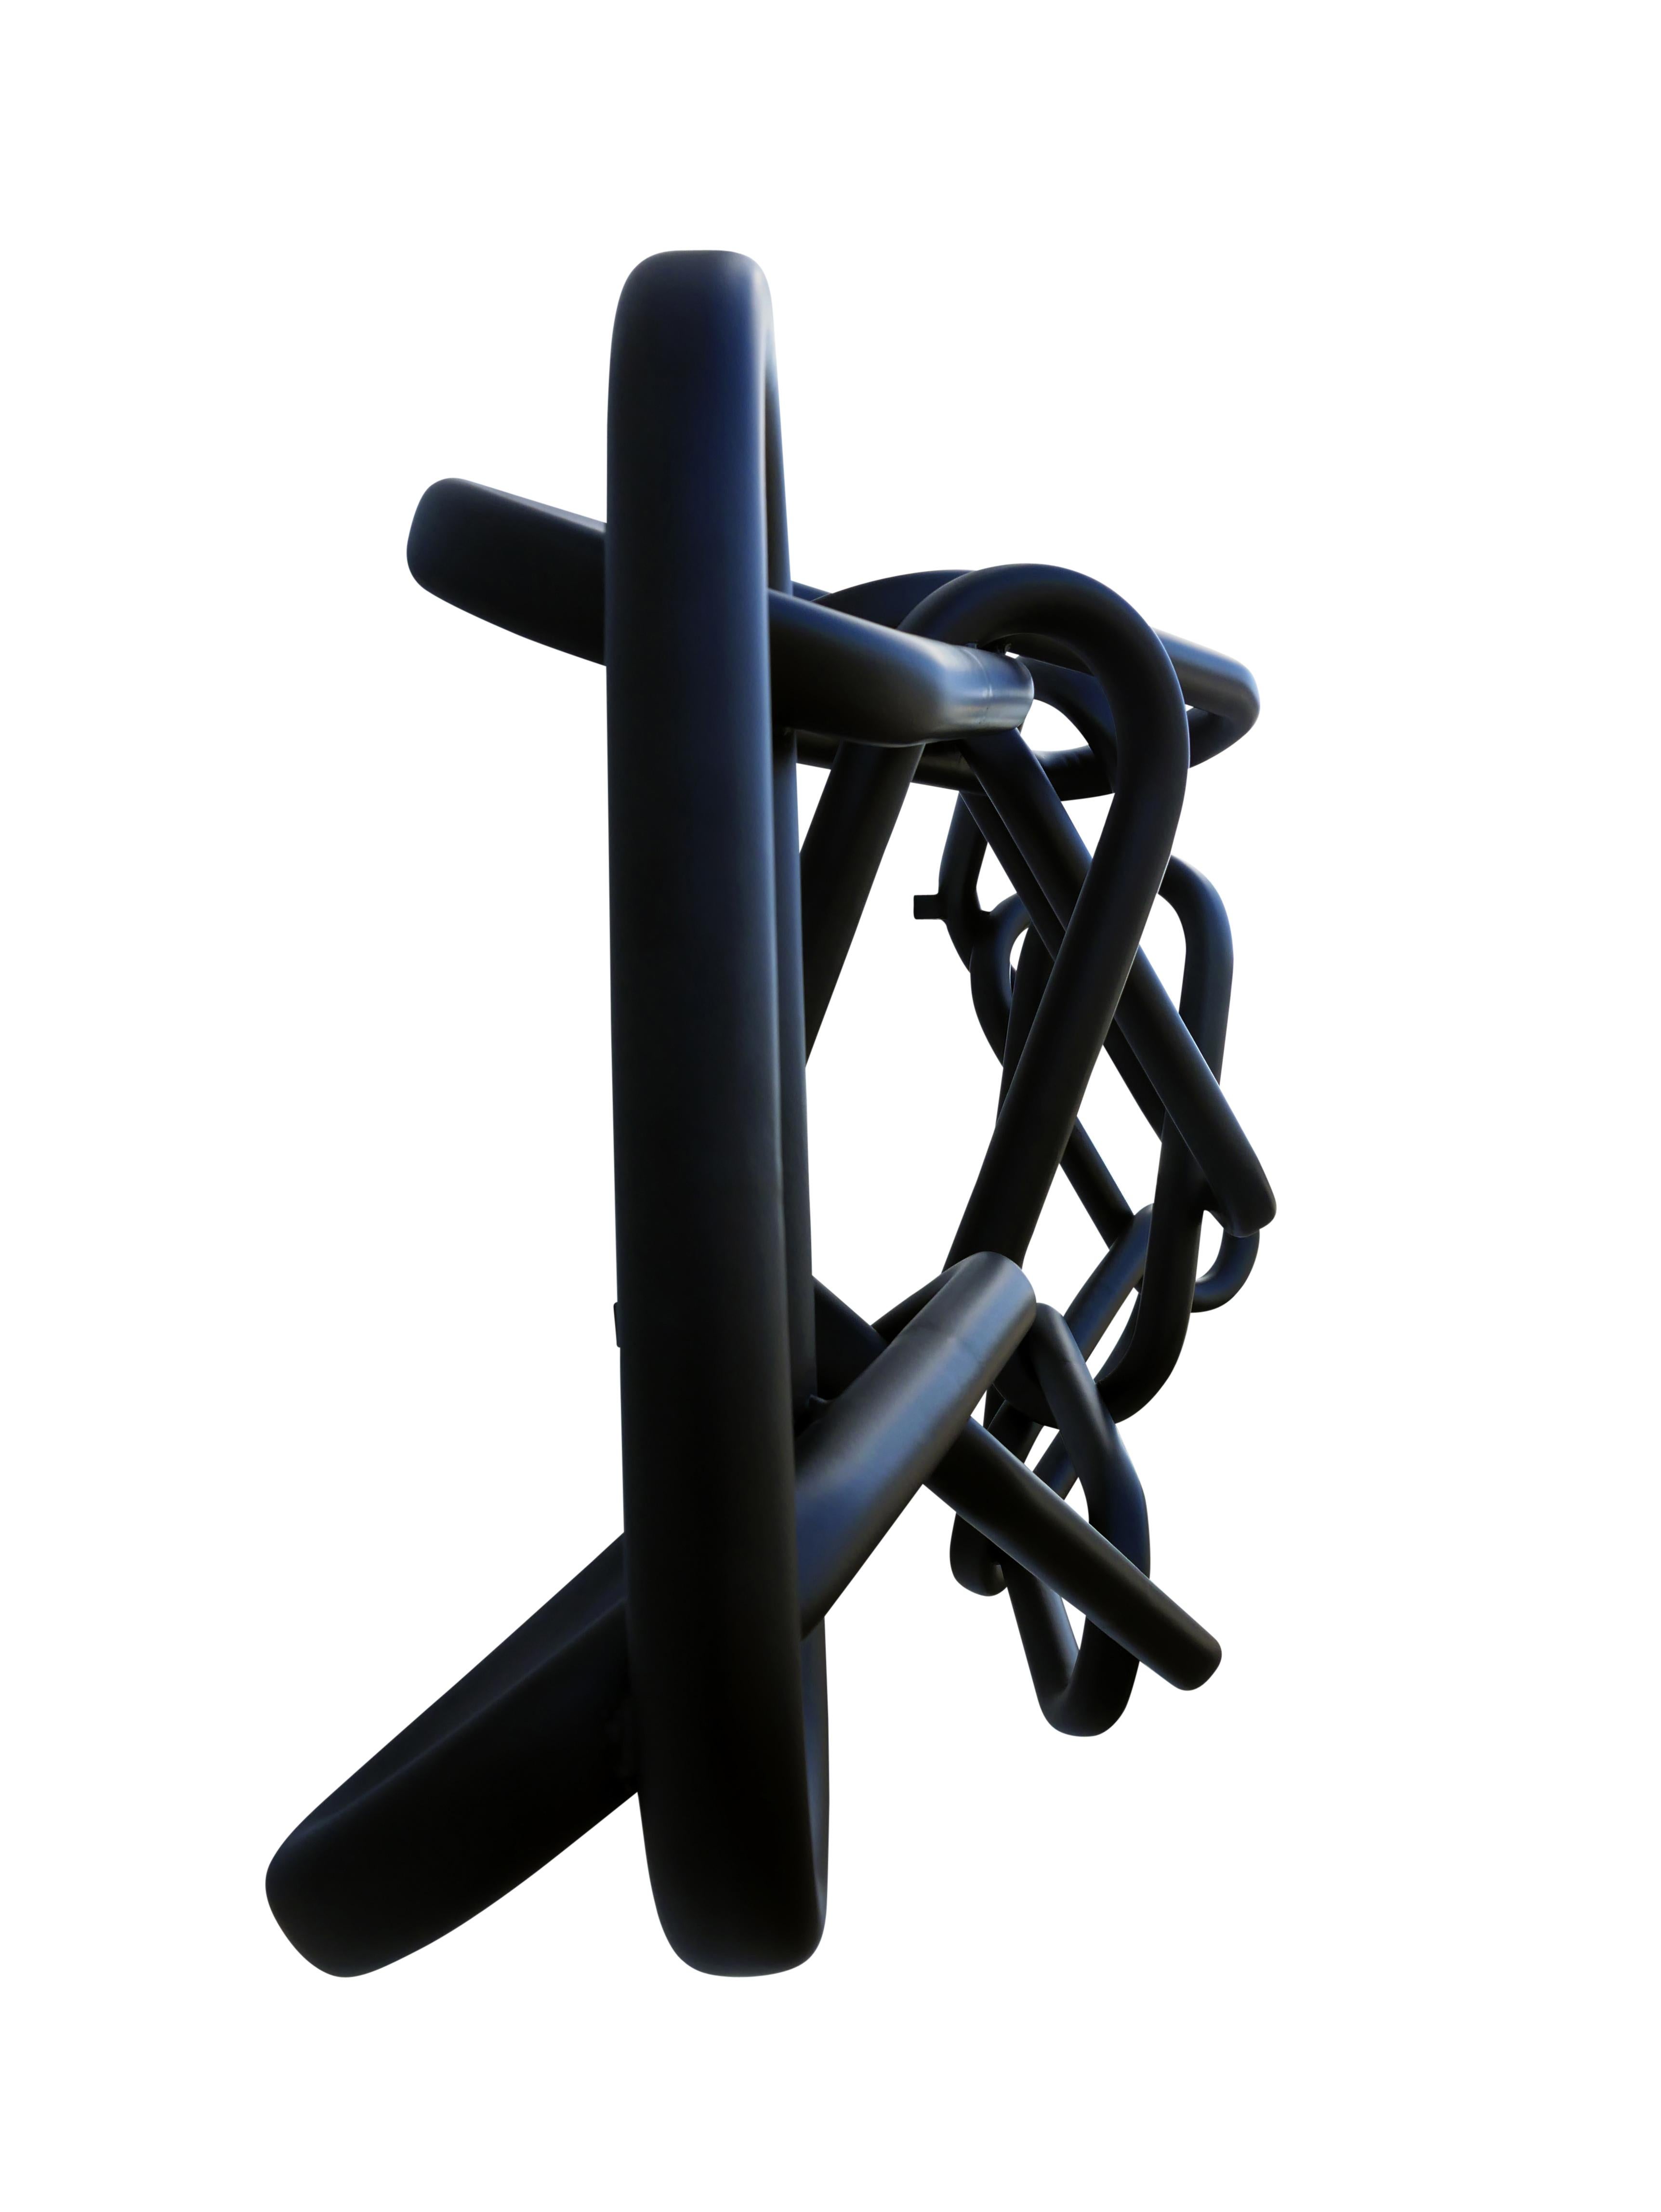 Large Abstract Contemporary Black Chain Wall Sculpture For Sale 3